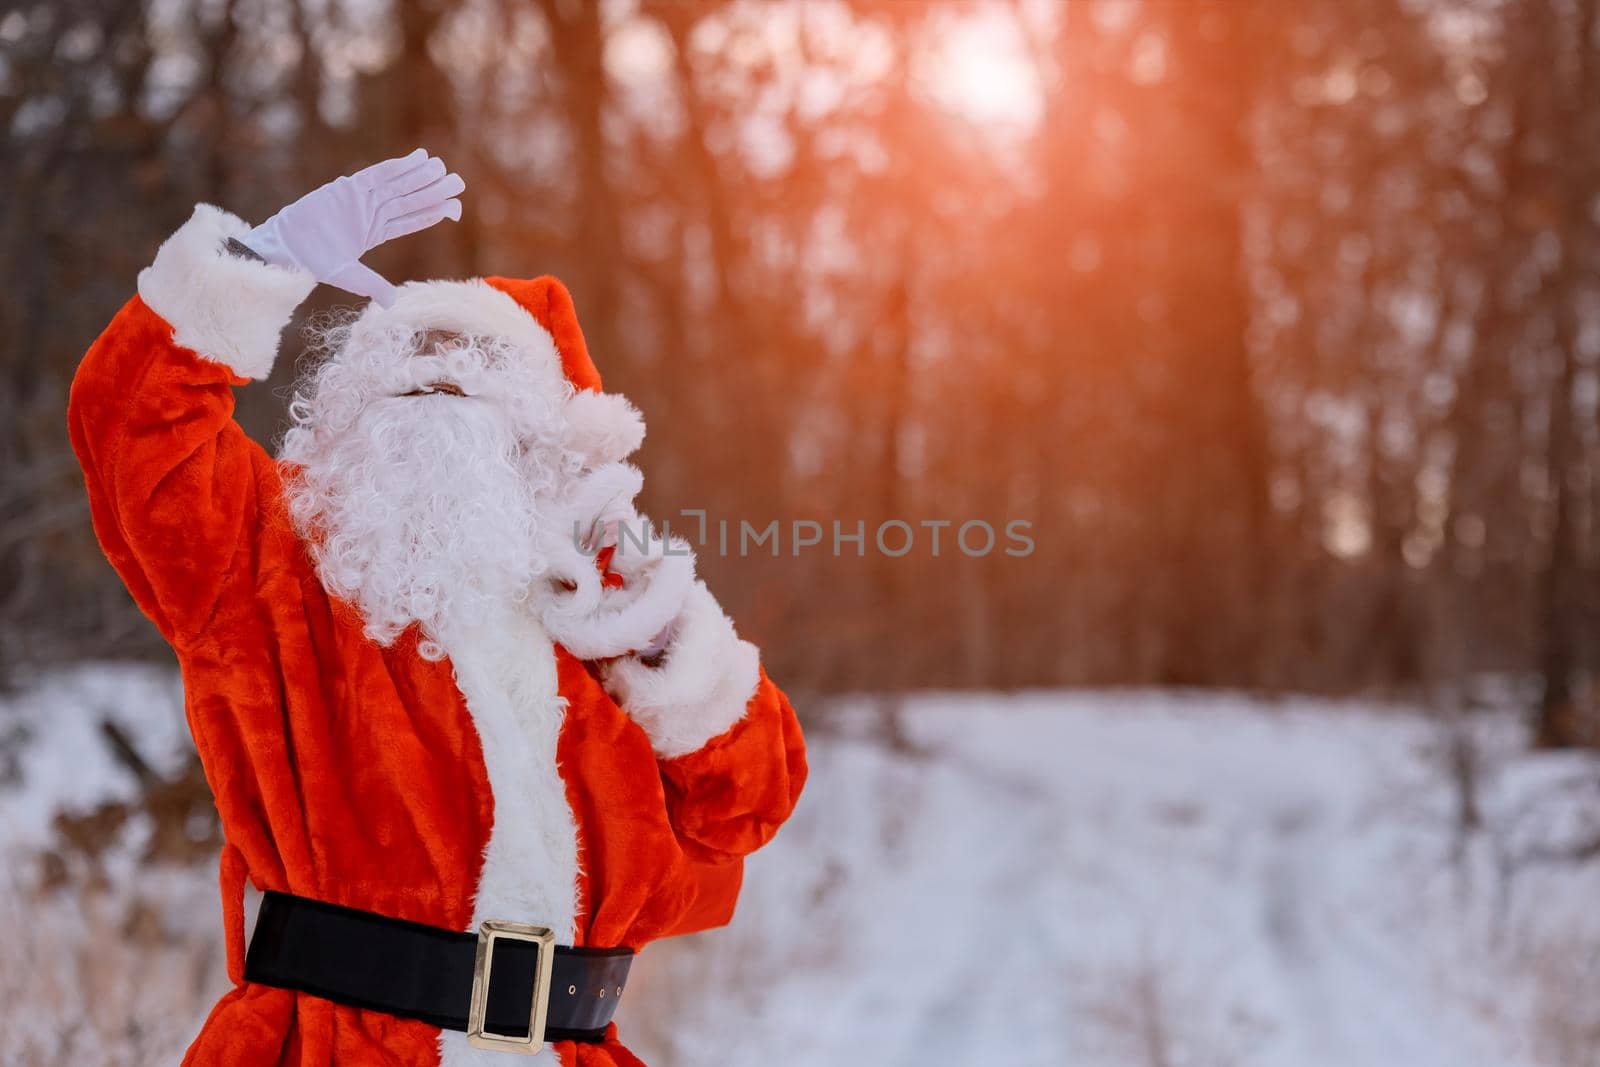 Authentic in the forest Santa Claus in carrying Merry Christmas present gifts to children